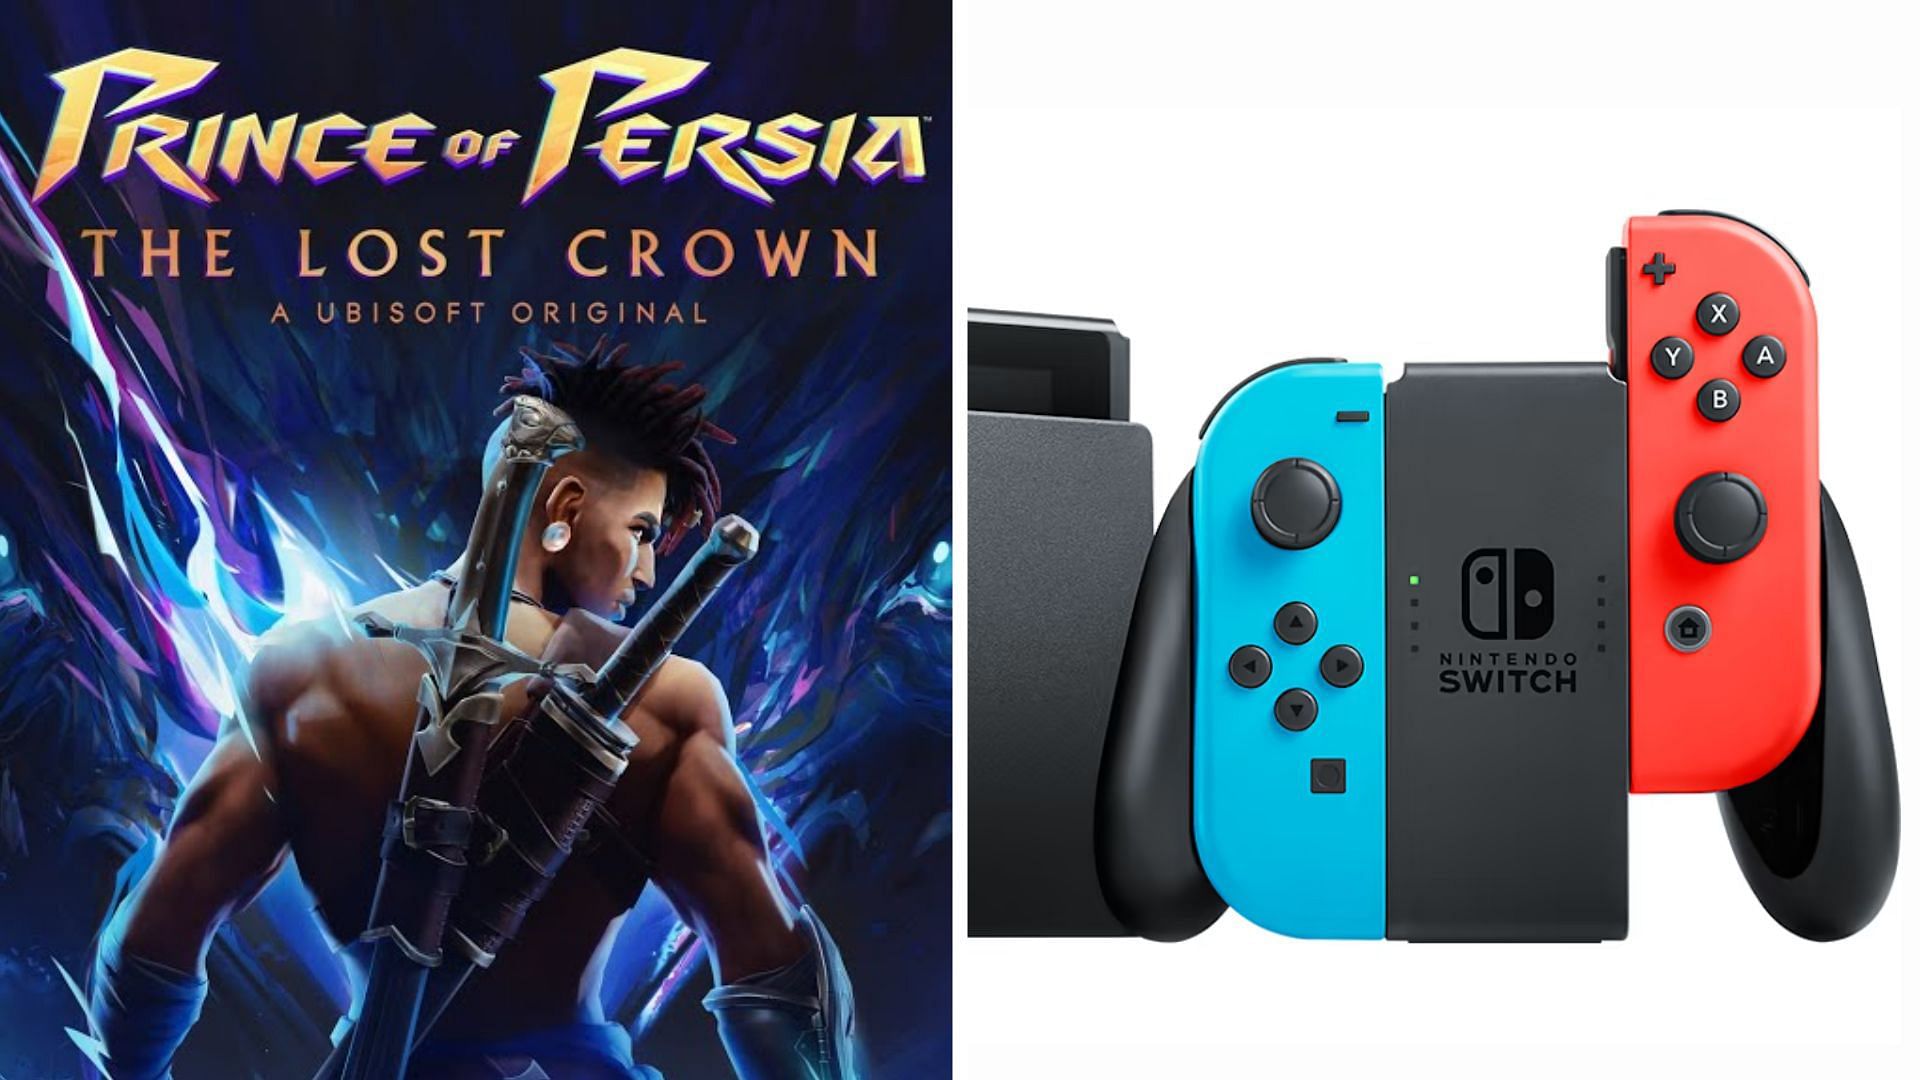 Prince of Persia cover and Nintendo switch on white background